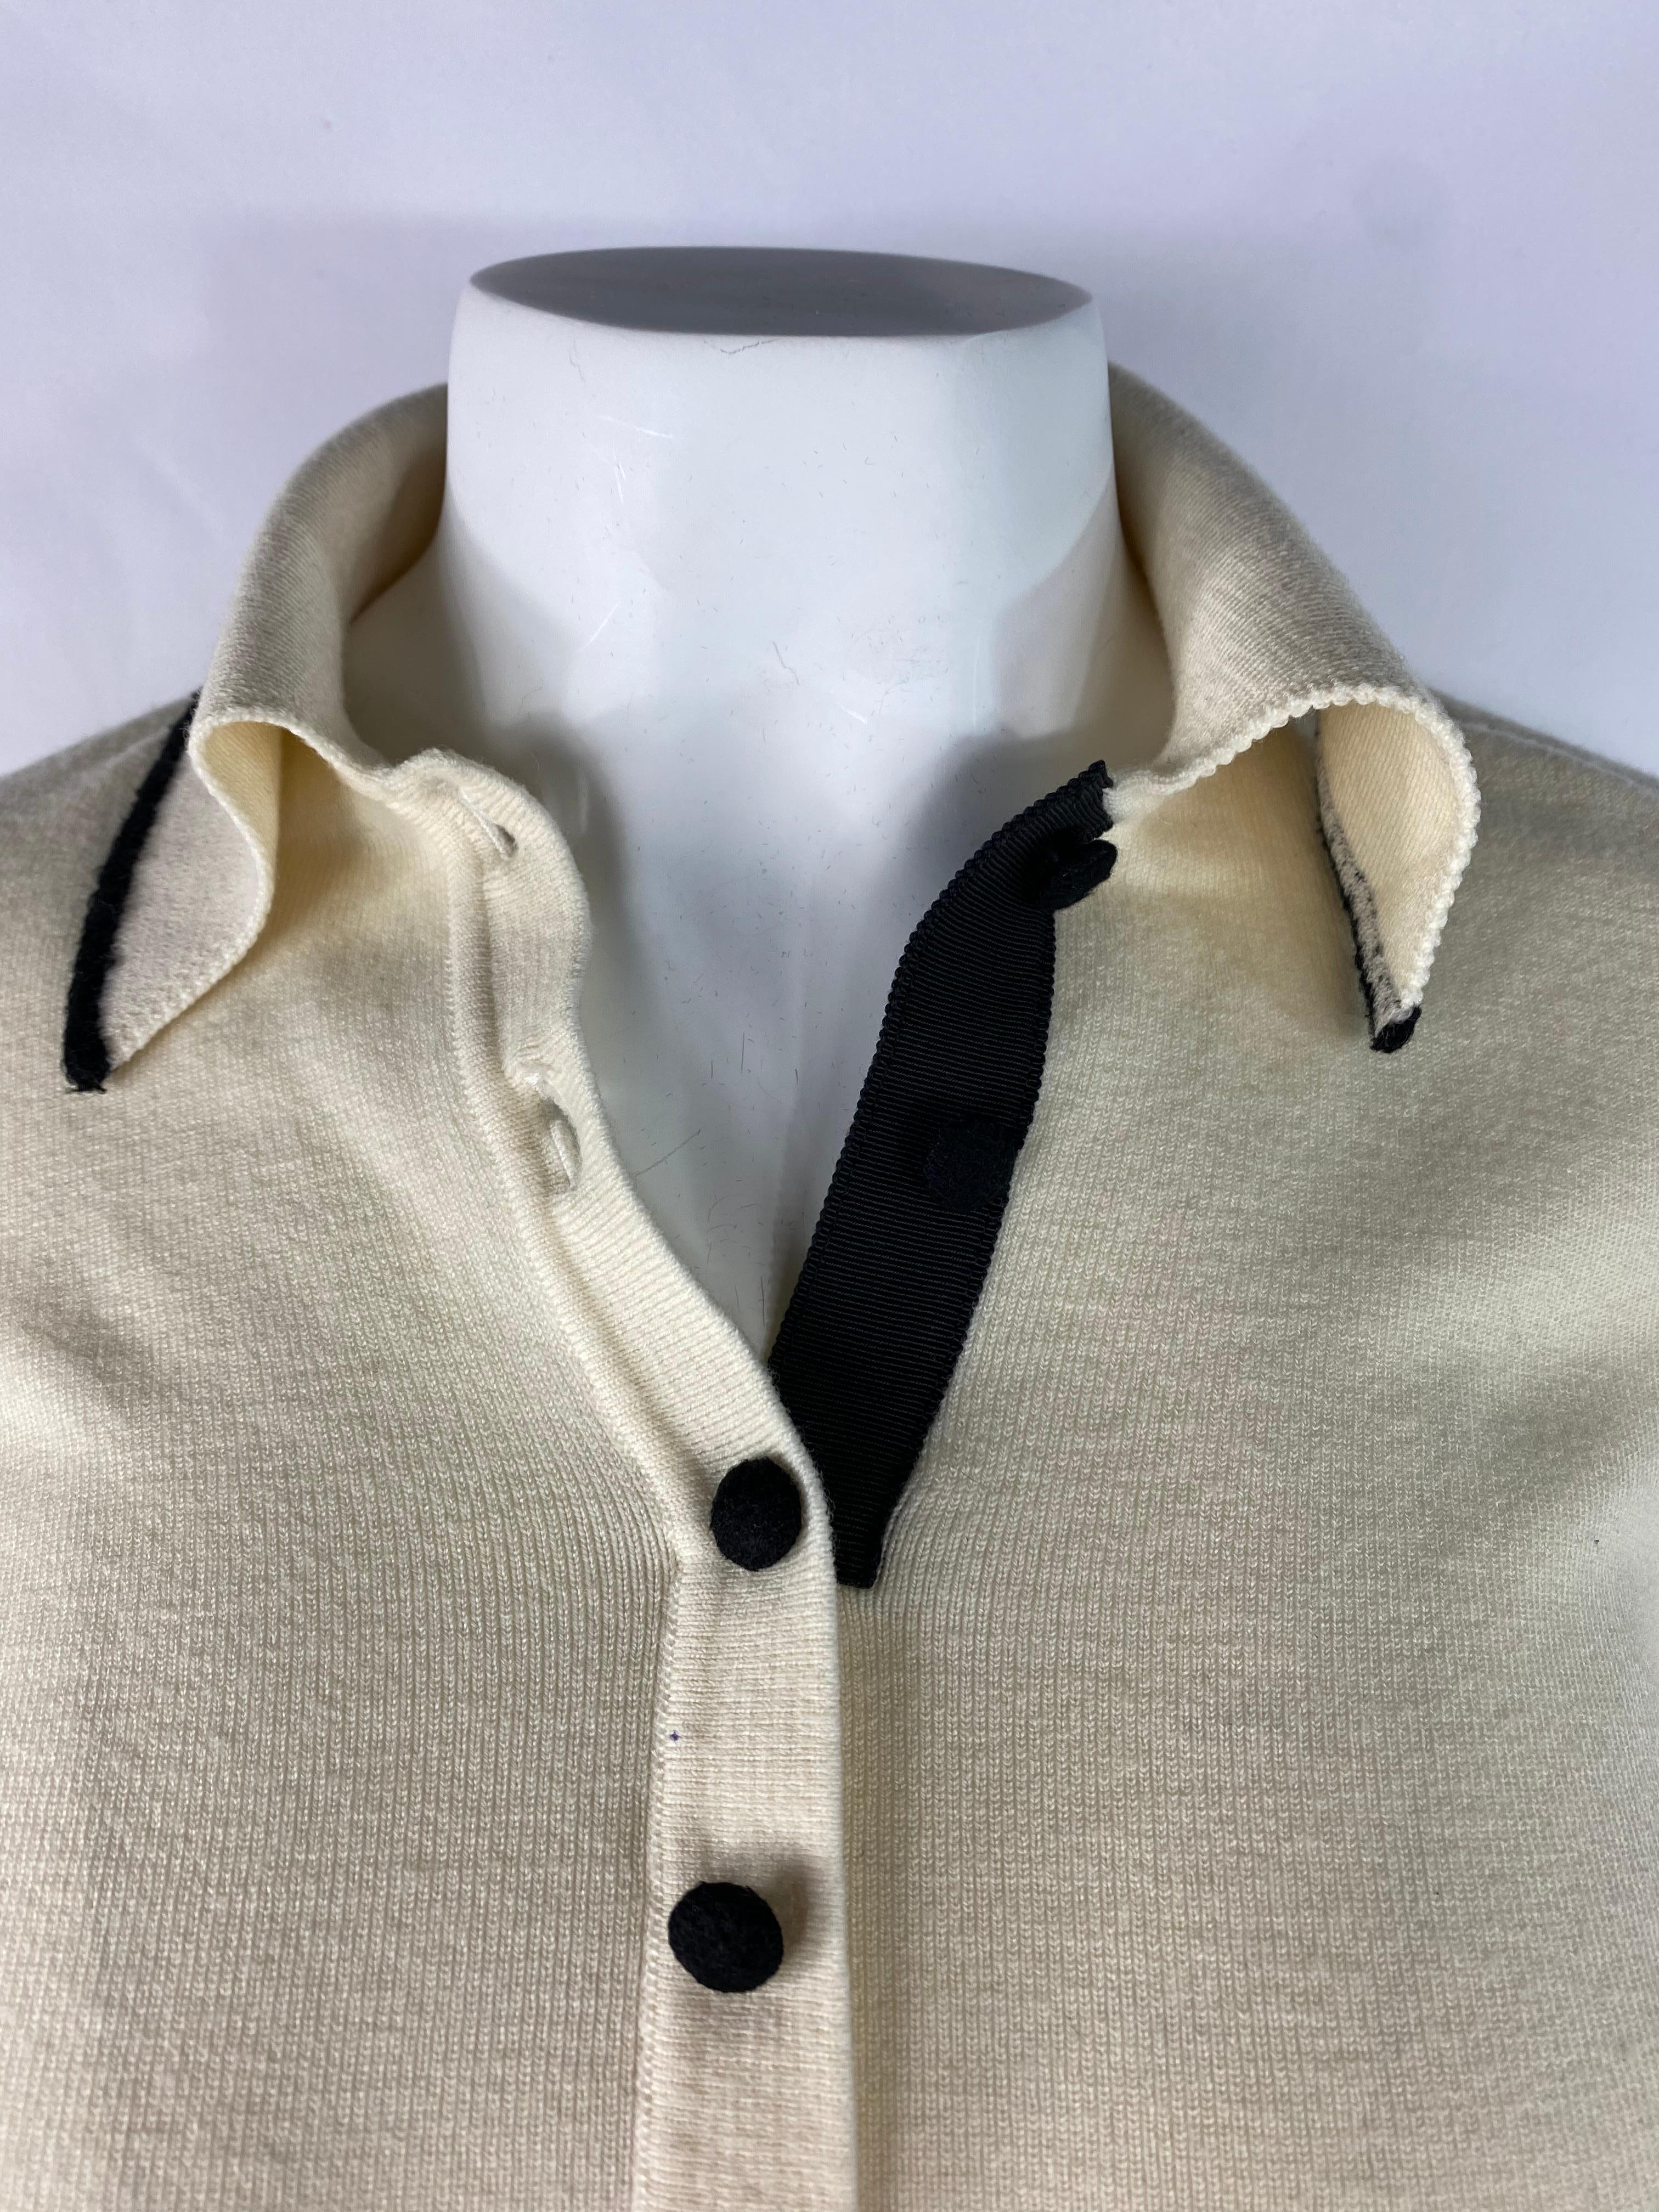 Product details:

Off white, cream and black wool blended top designed by Christian Dior in France. The top features collar, four front button closure, 3/4 sleeves length (16 inches long). The size is large.